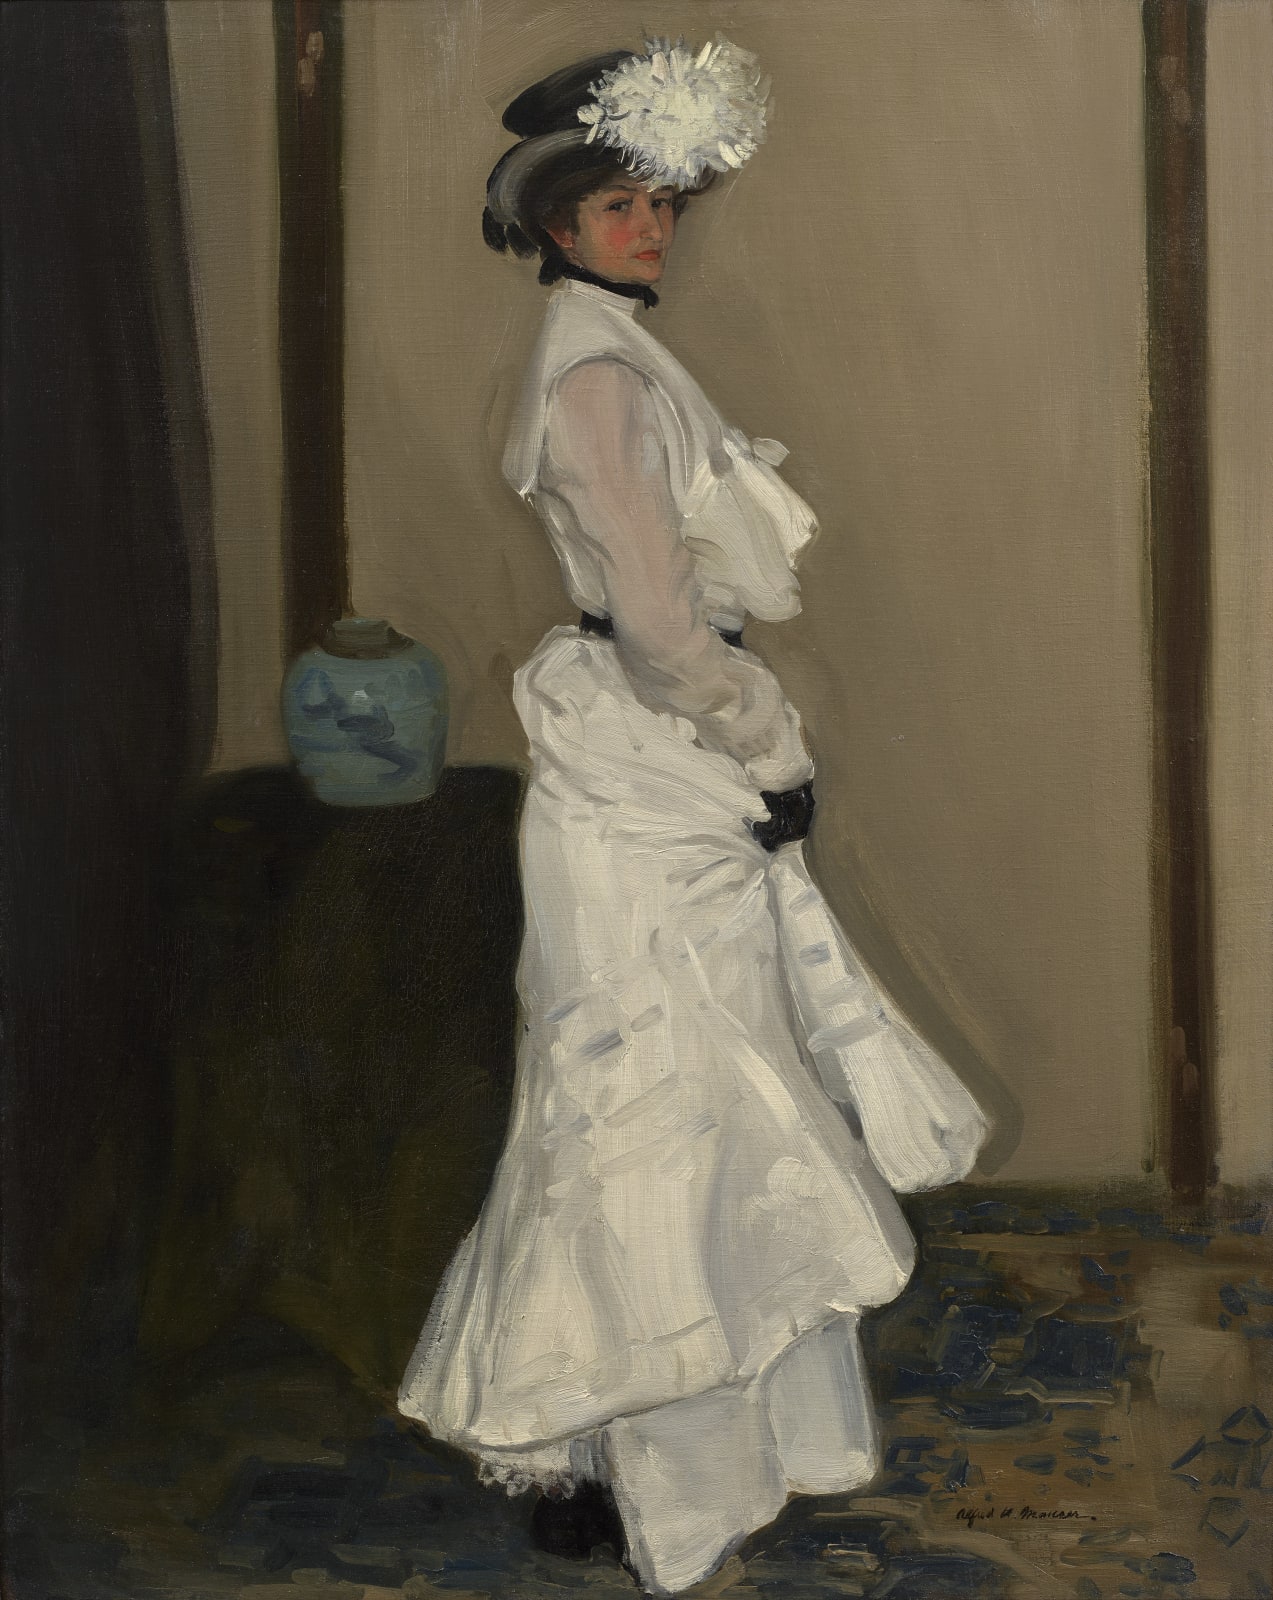 Alfred Maurer, The Woman in White, c. 1900